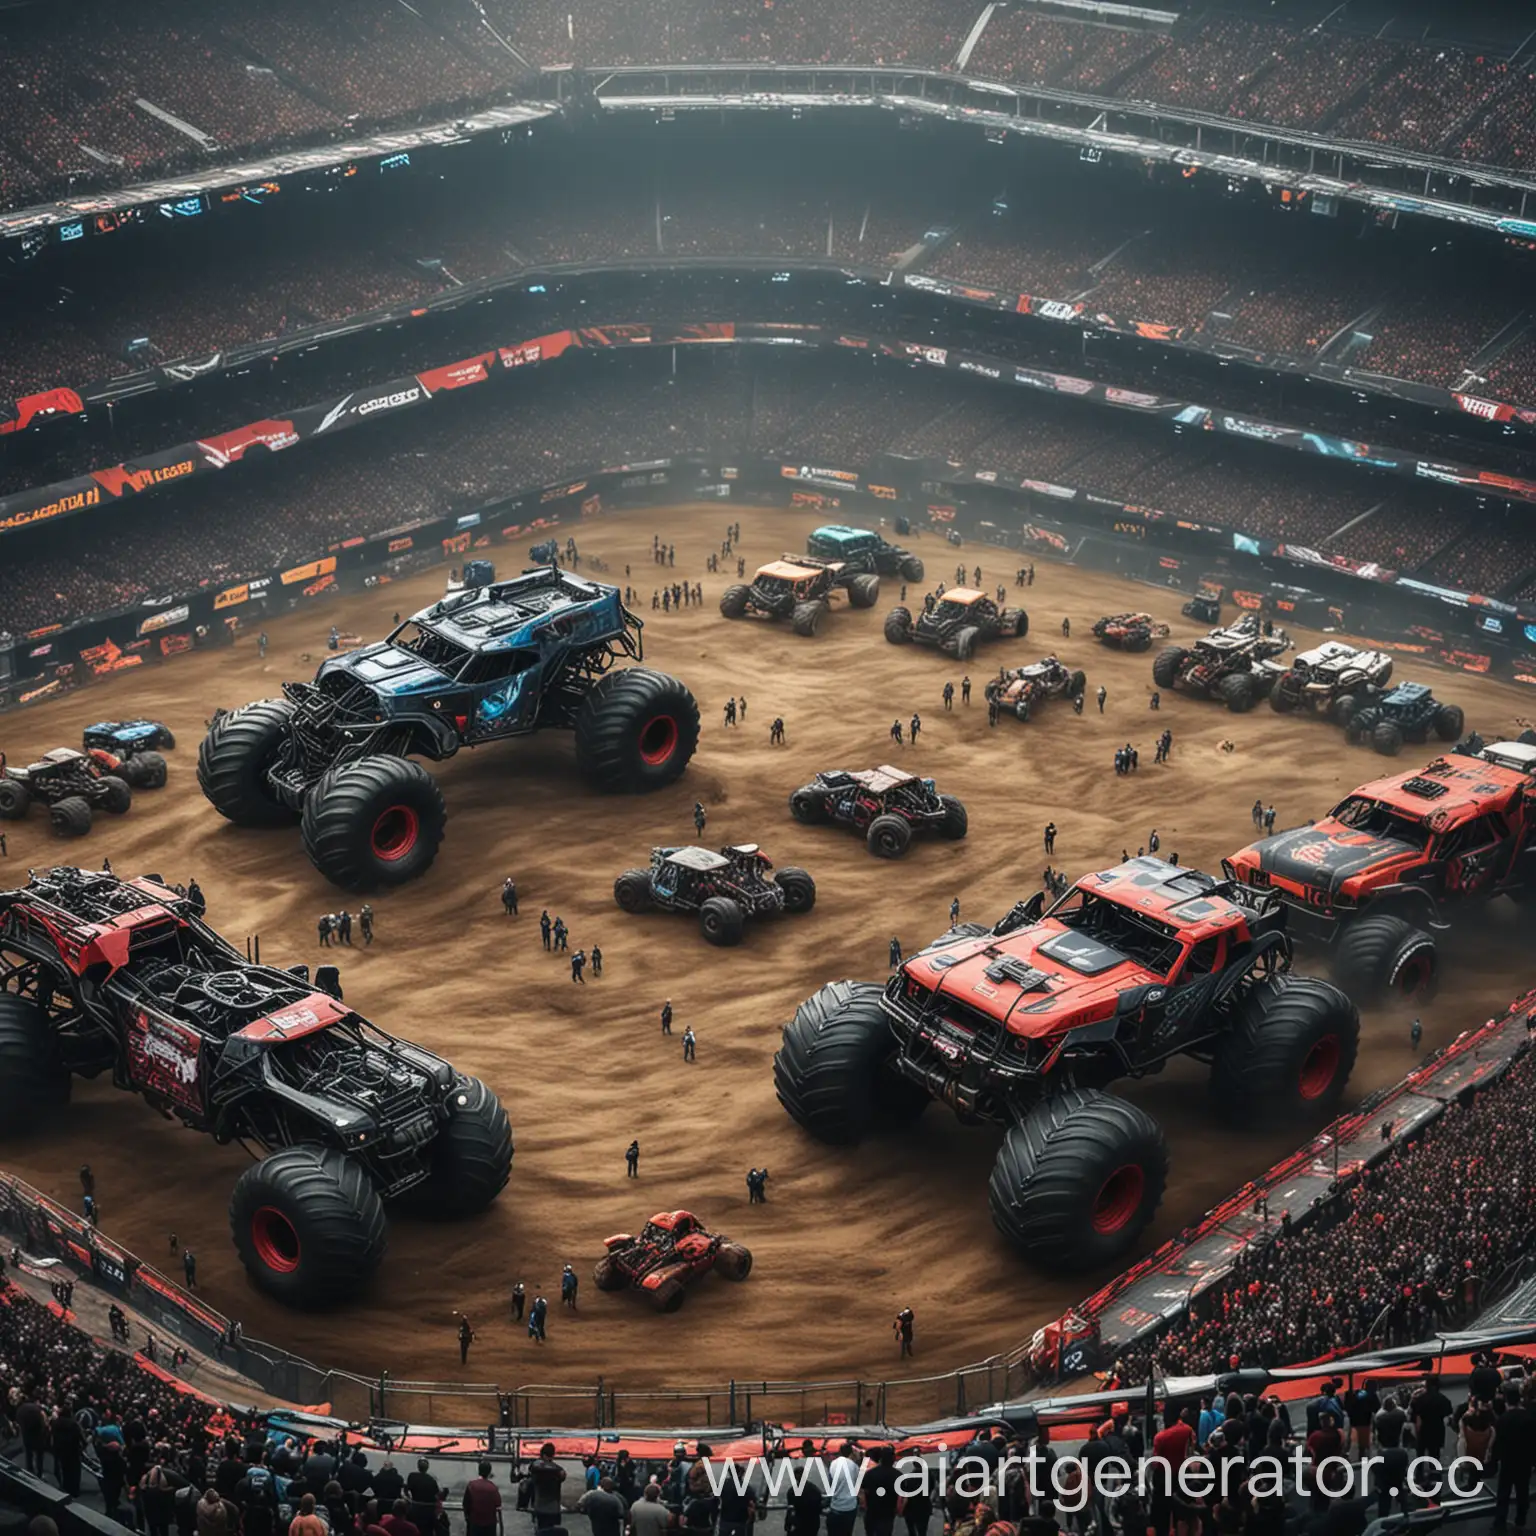 Cyberpunk-Monster-Truck-Spectacle-in-a-Massive-Arena